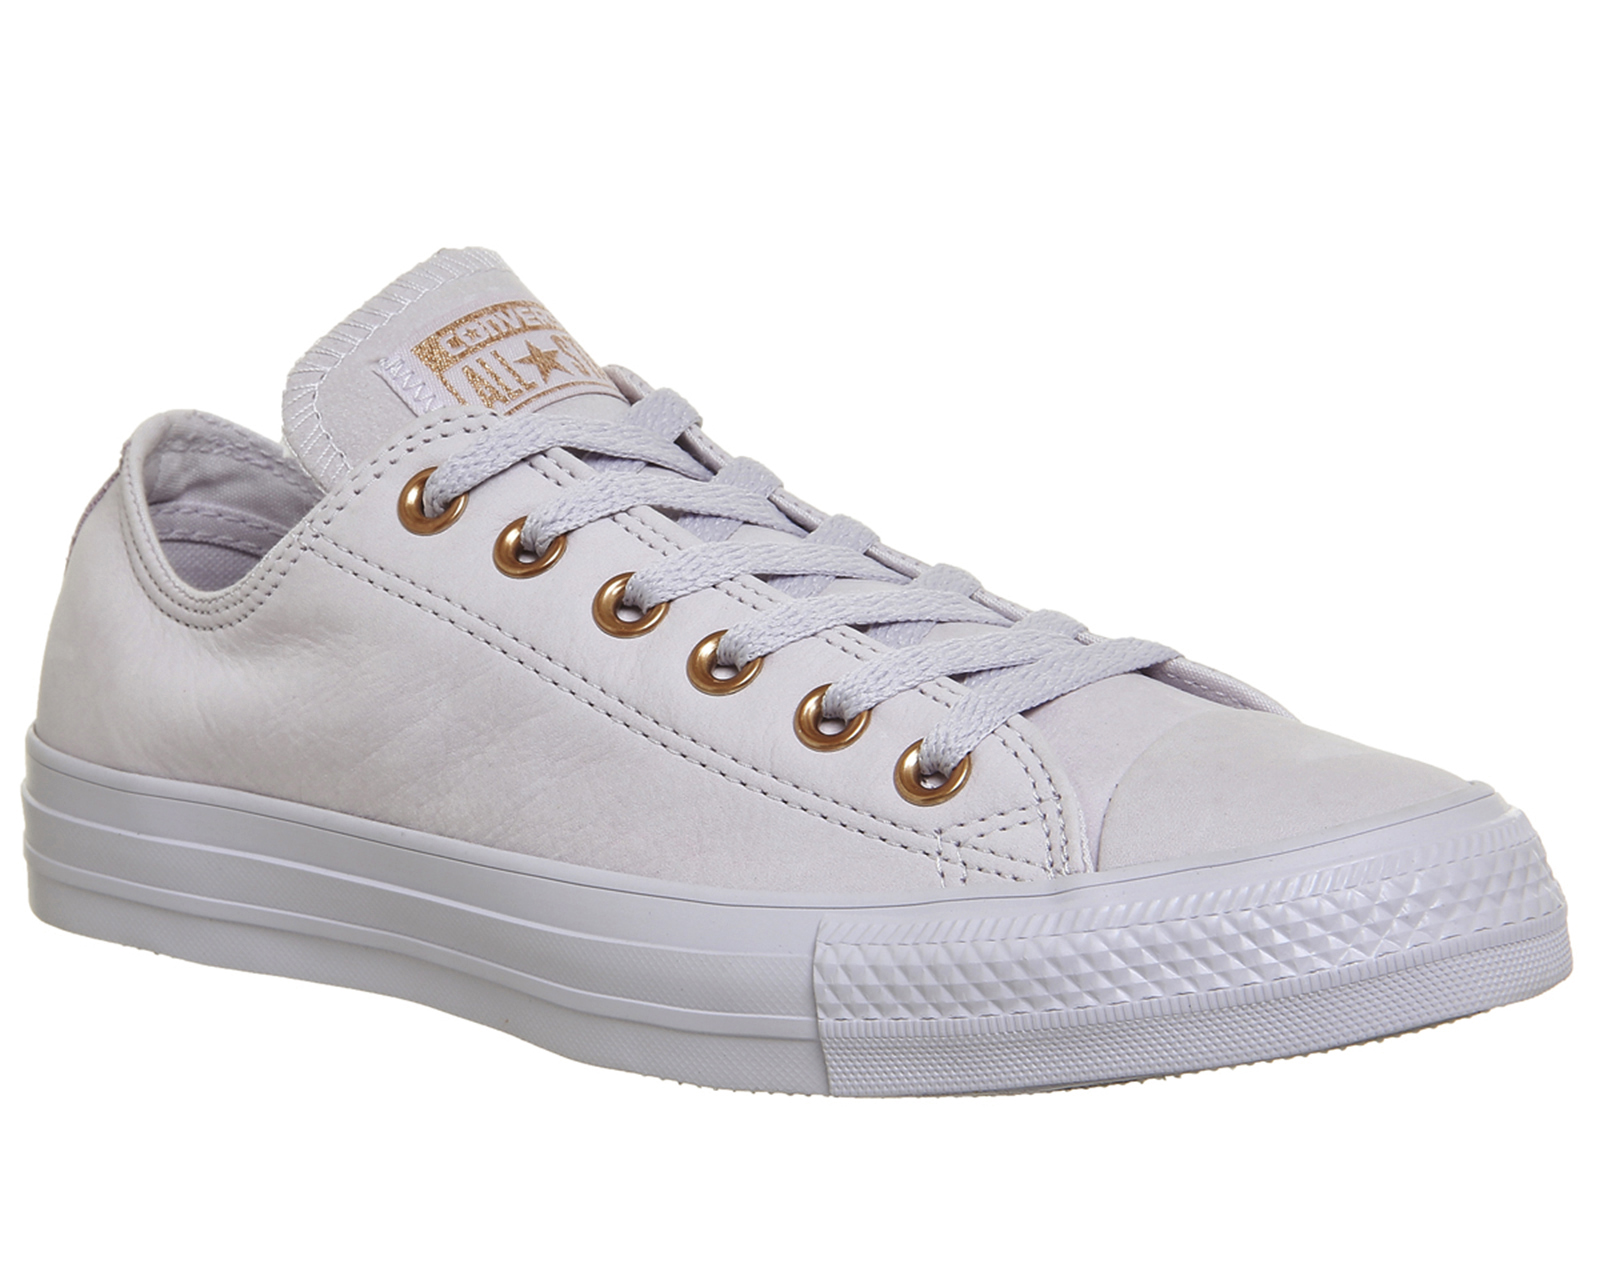 converse with gold eyelets - 55% remise 